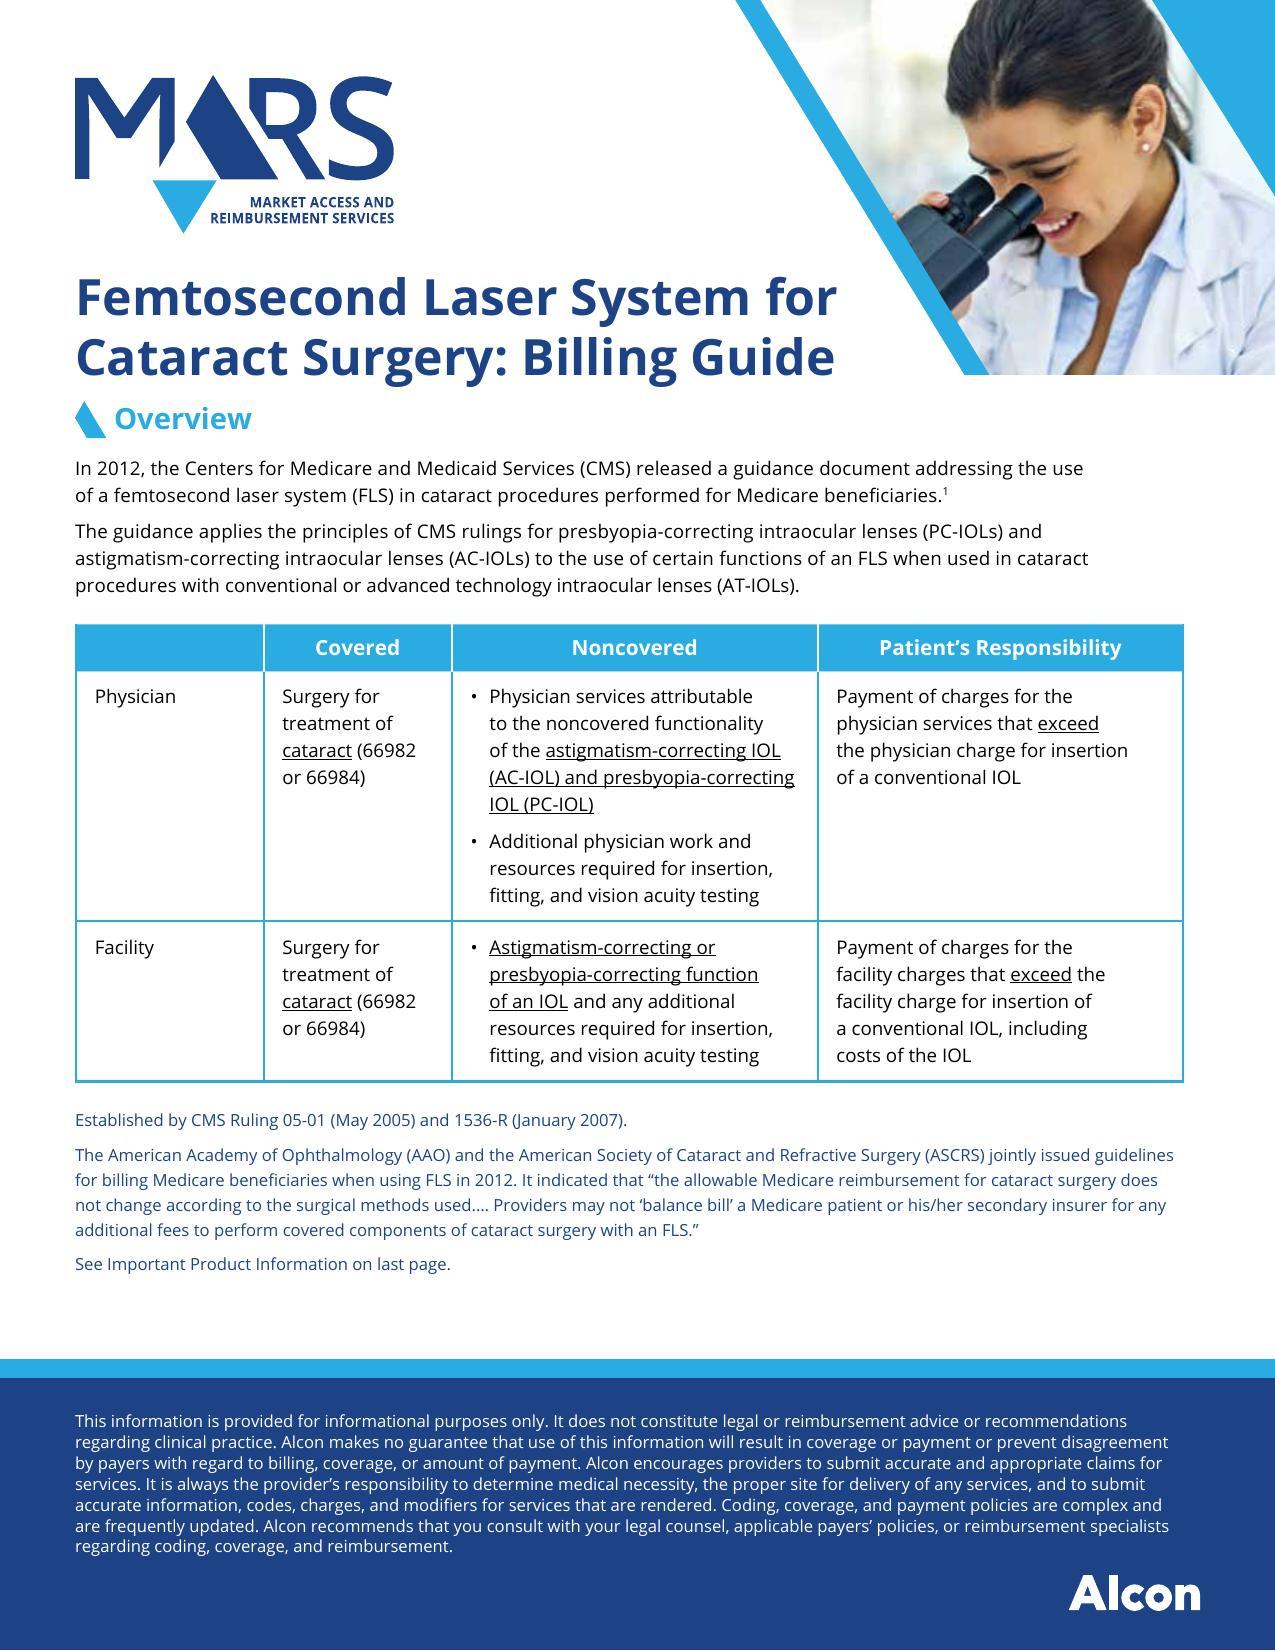 lensx-laser-system-for-cataract-surgery-billing-guide-overview.pdf